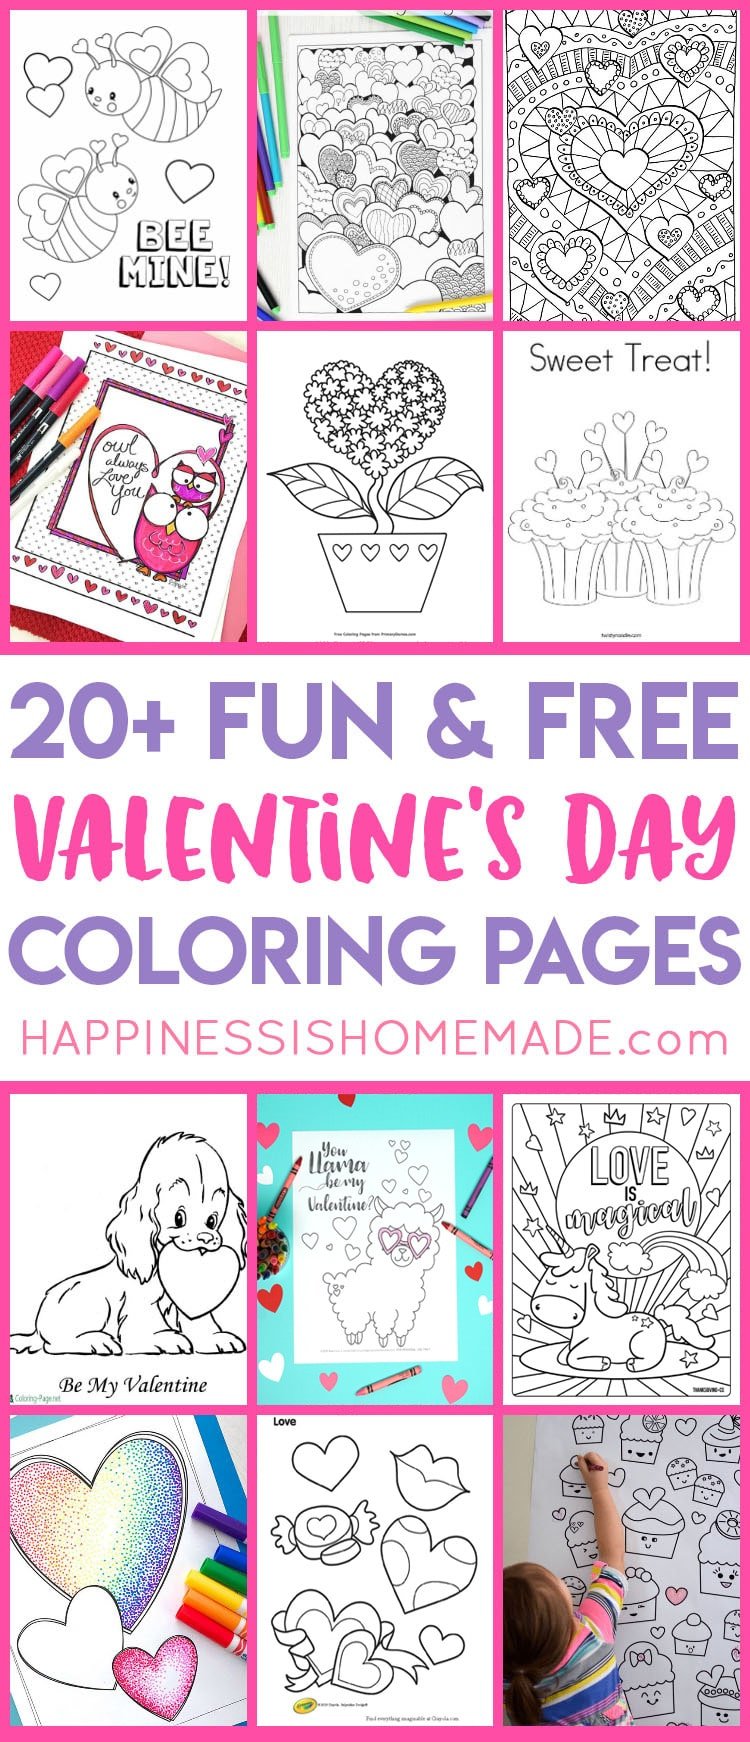 20+ fun and free valentines day coloring pages